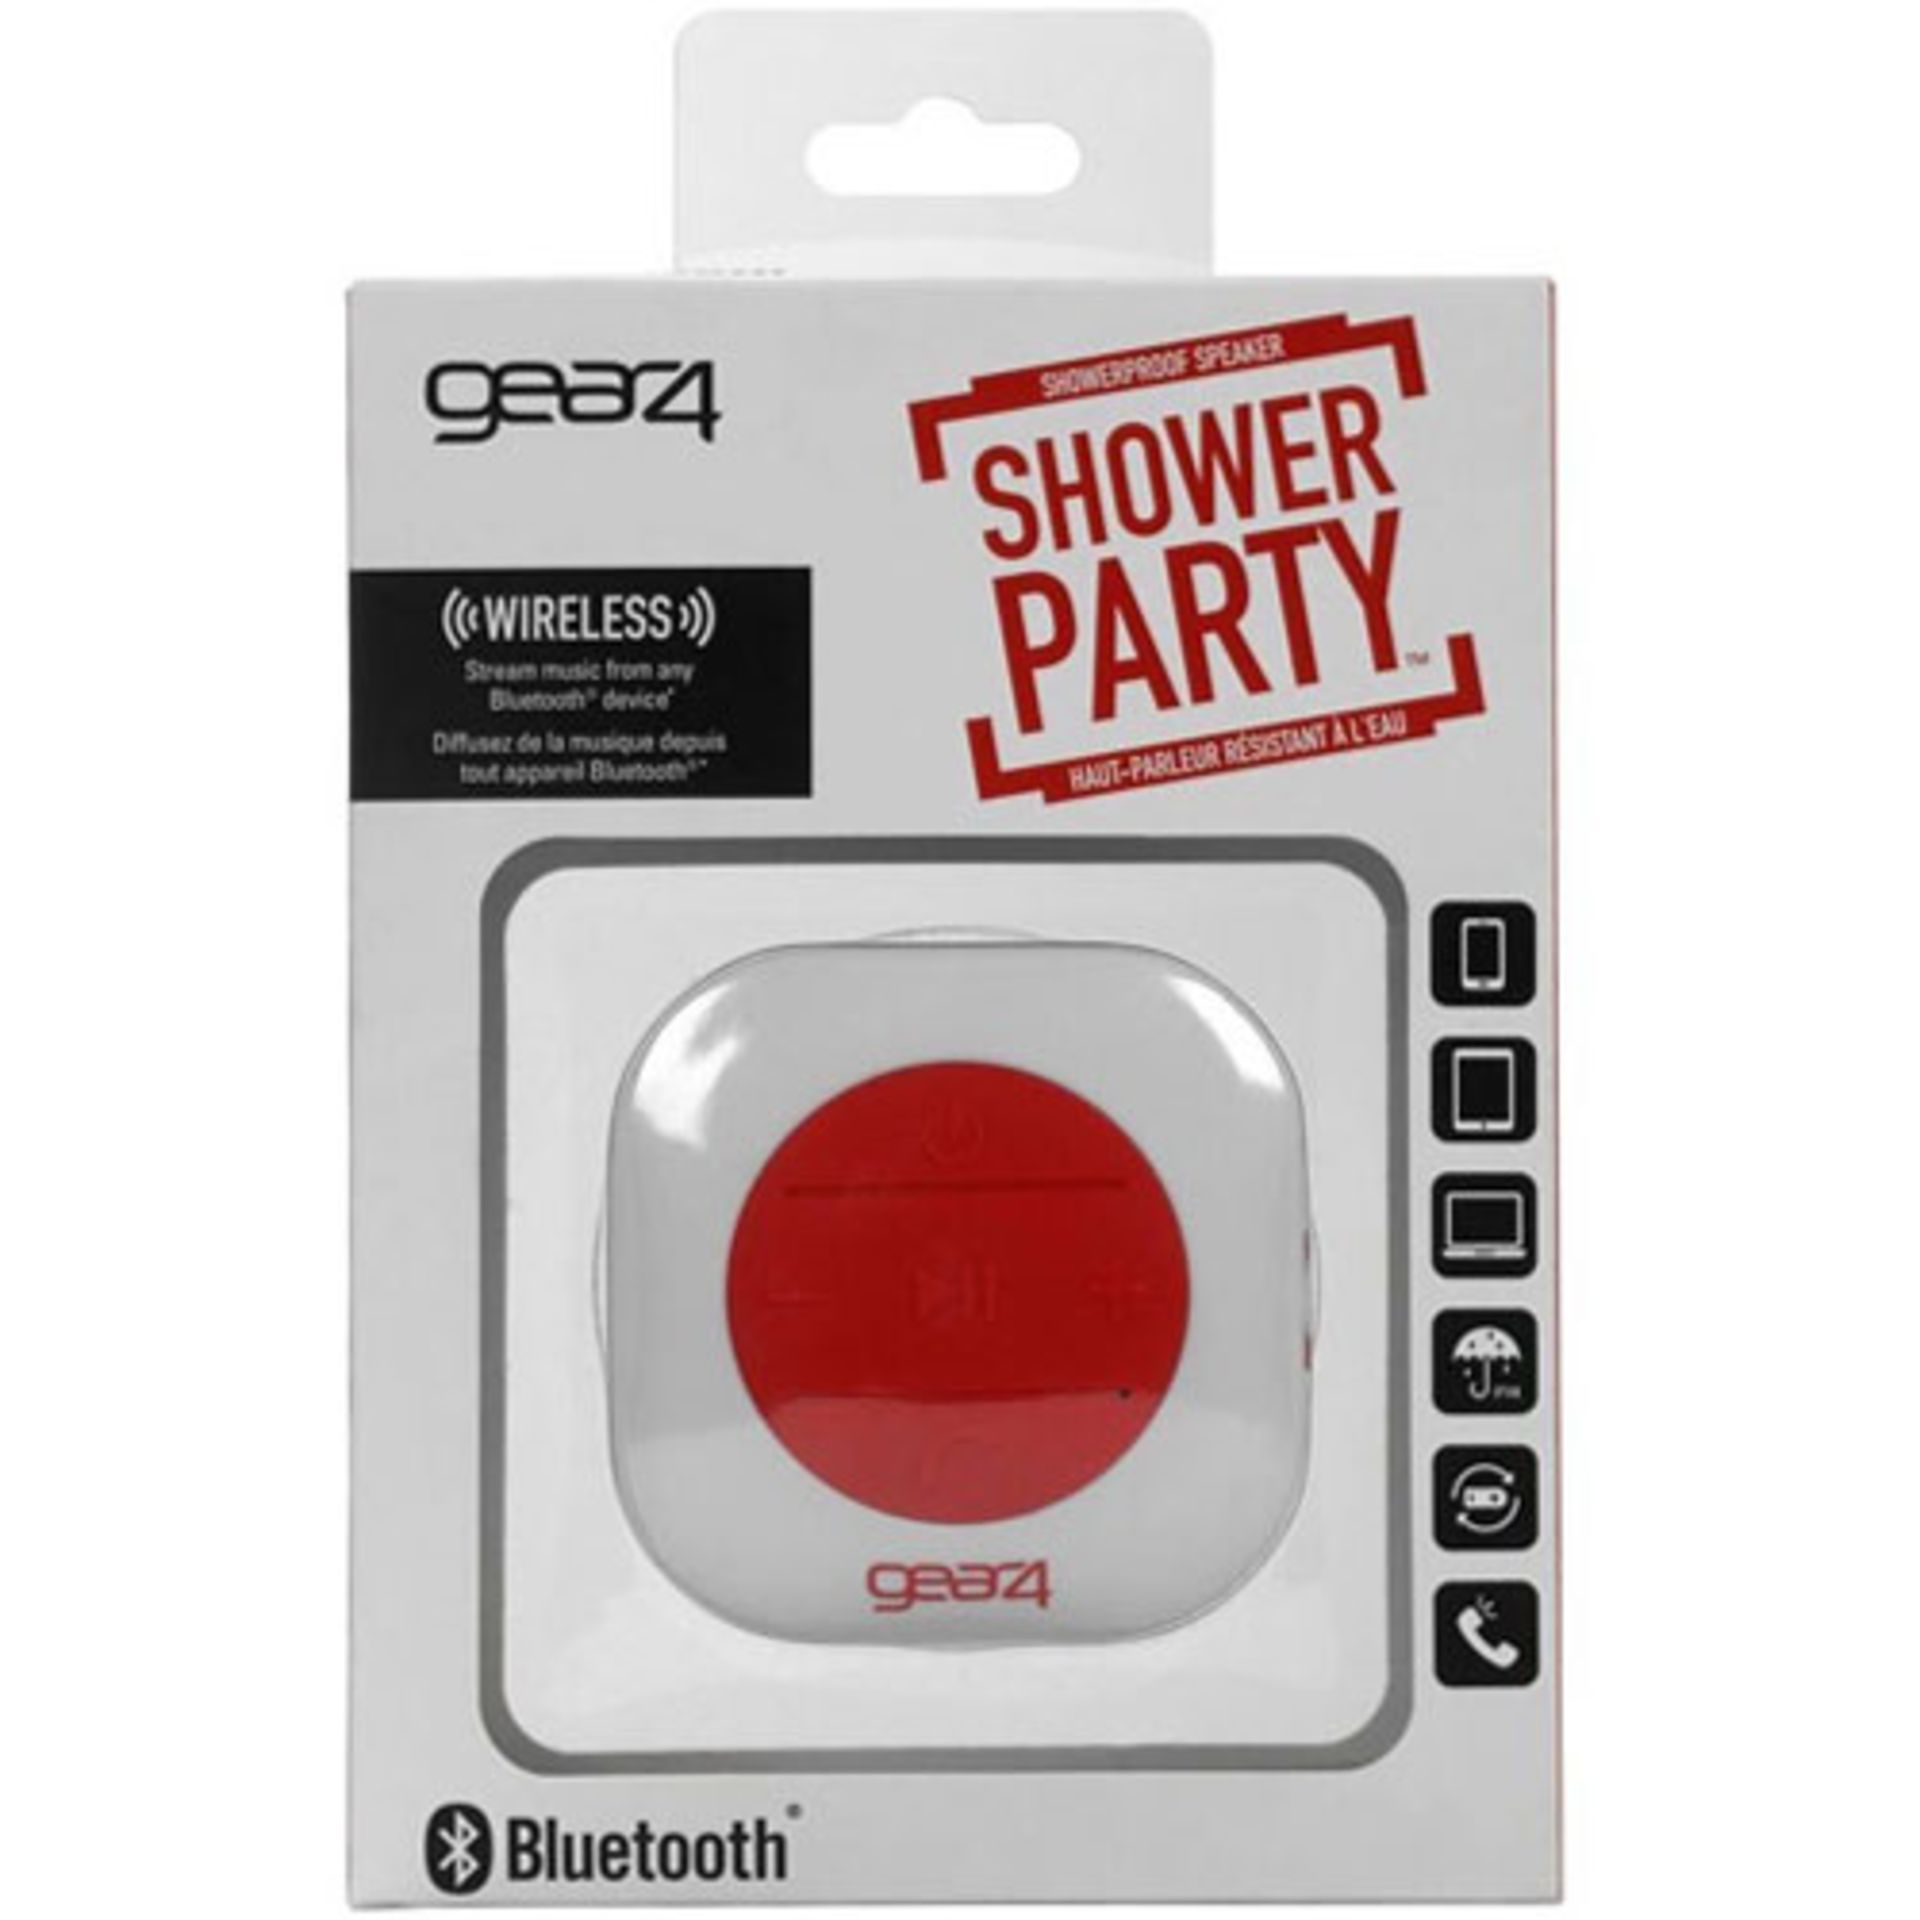 V Brand New Gear4 Shower Party Wireless Speaker With Bluetooth - Showerproof - Play/pause Function - - Image 2 of 2